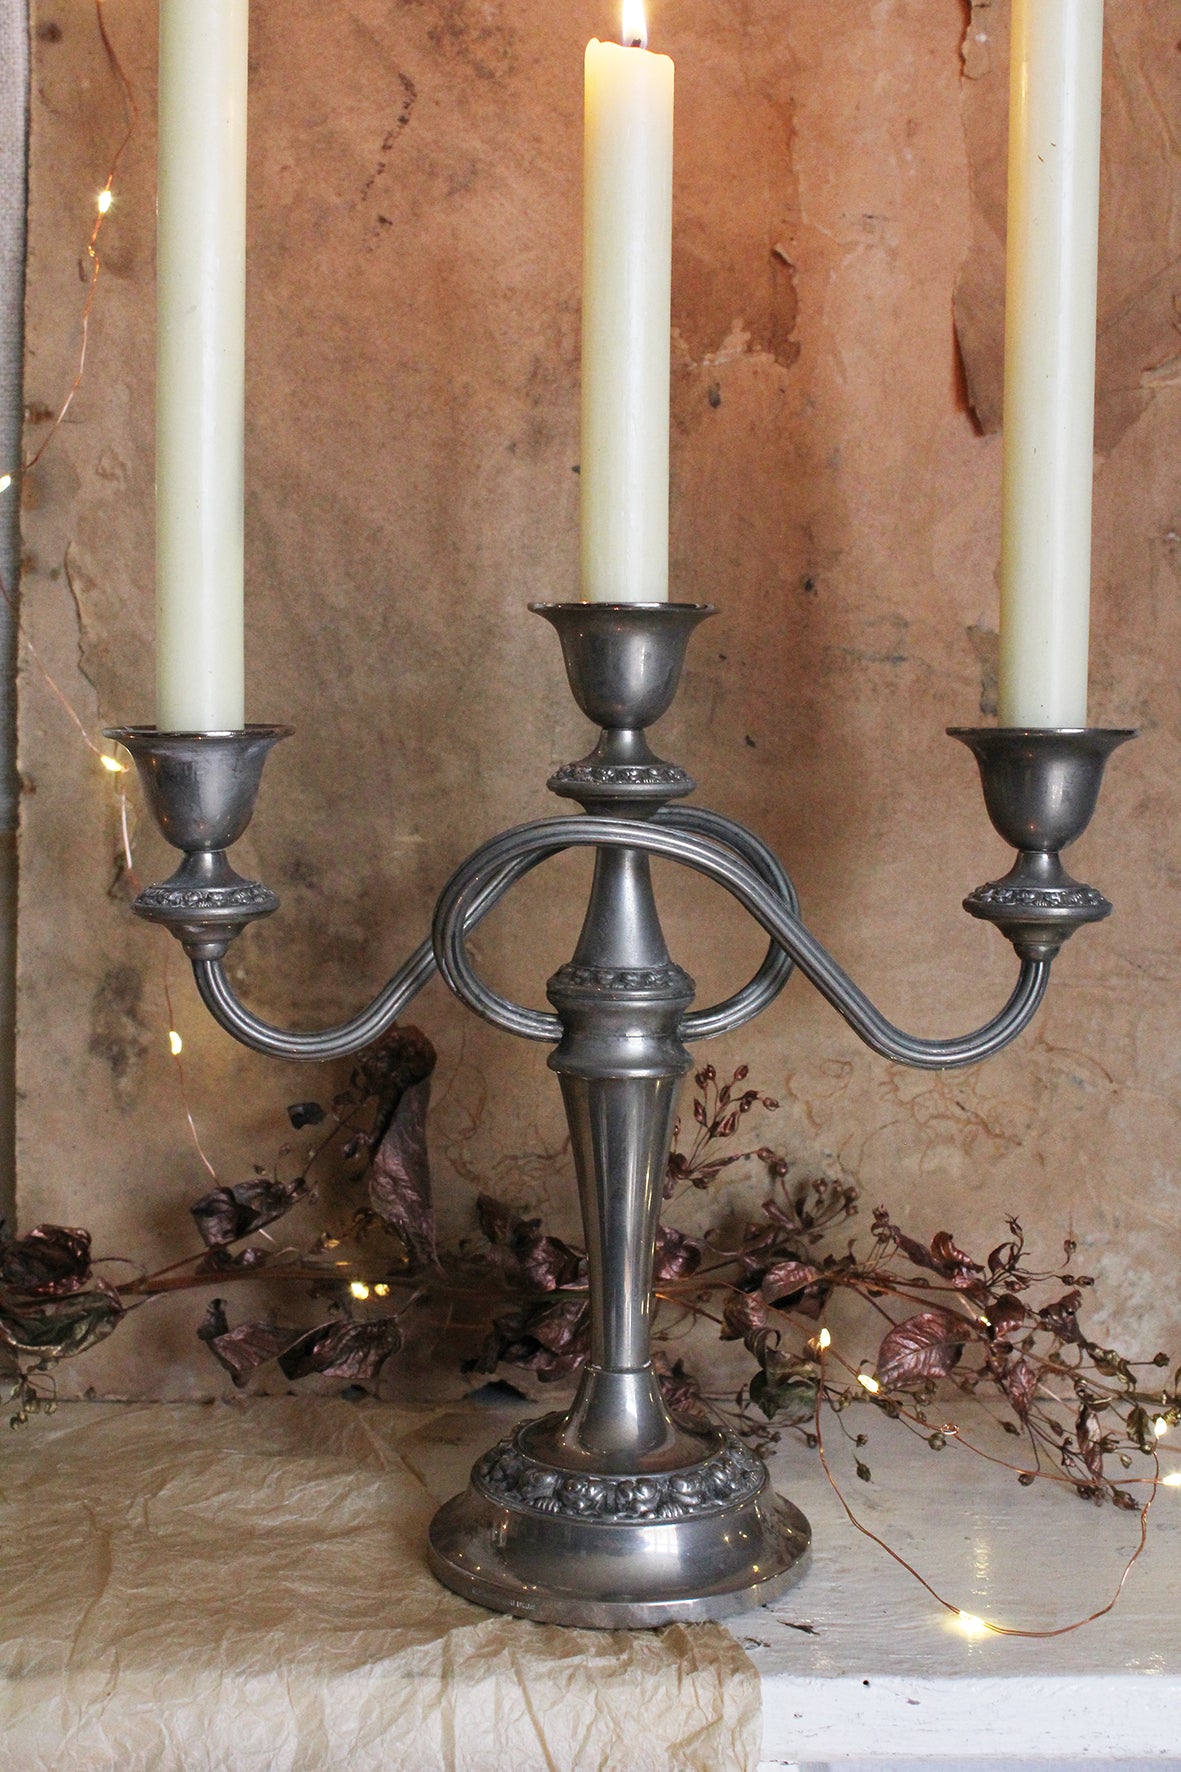 A Very Beautiful Early Plate Candelabra & Candles - Patina